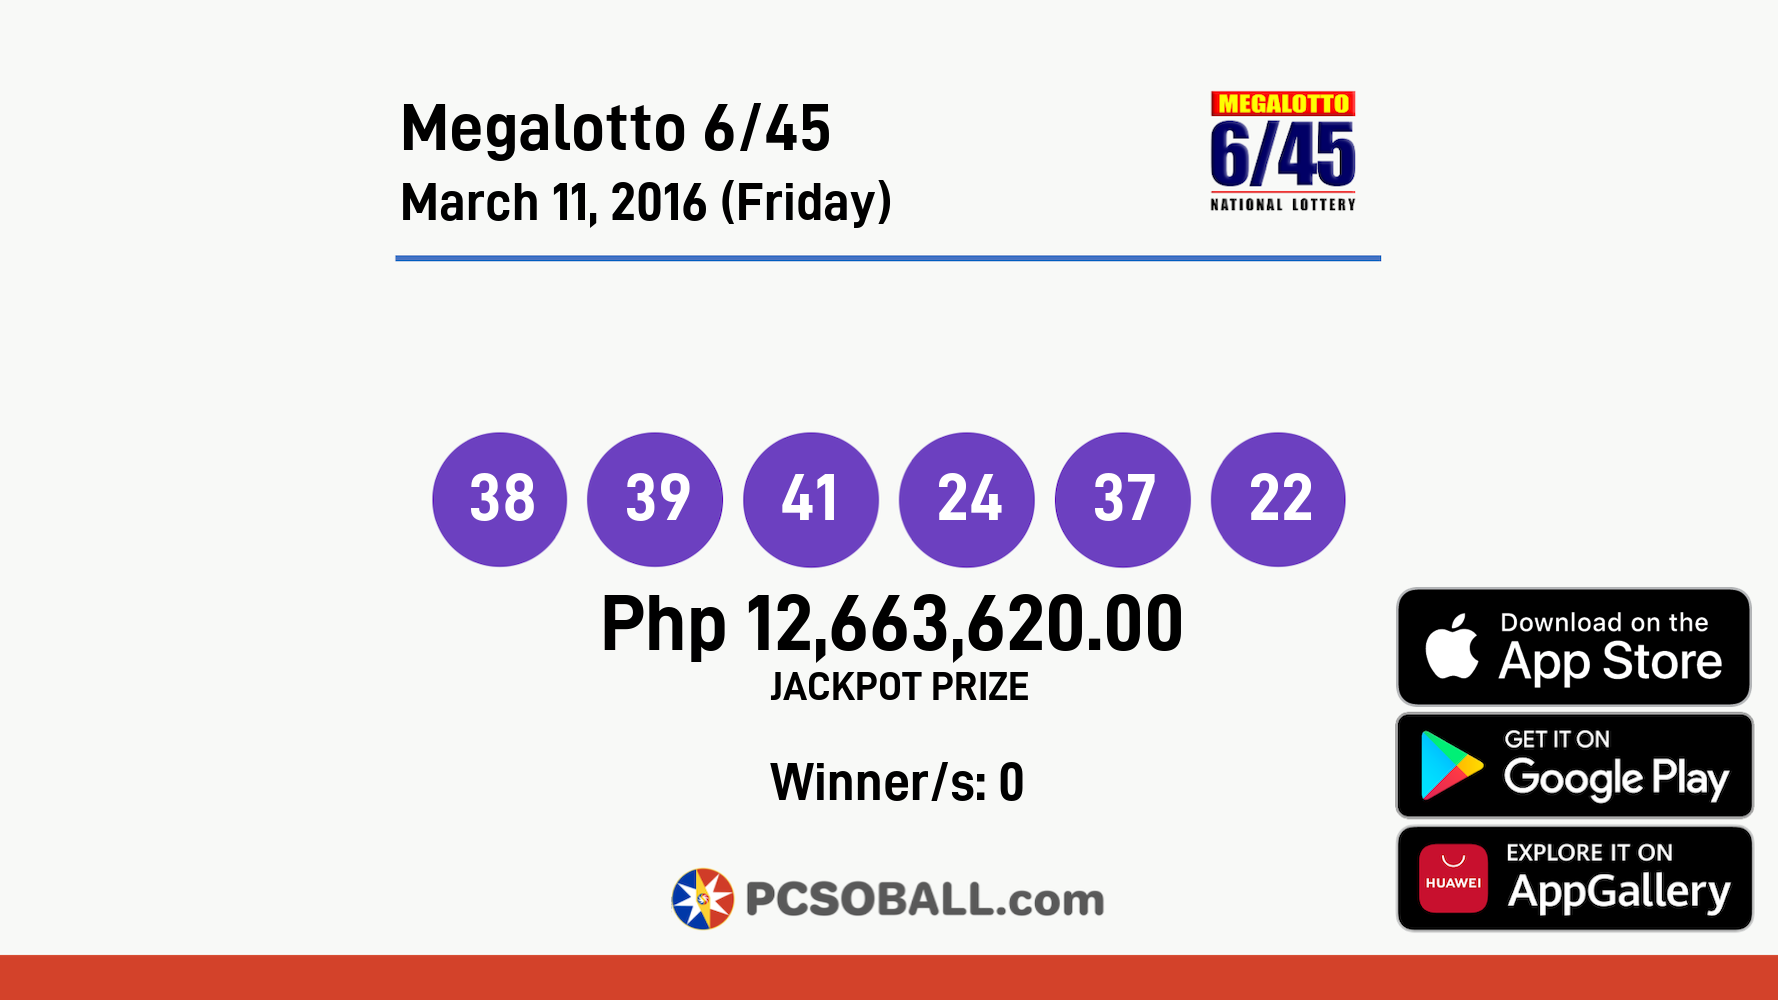 Megalotto 6/45 March 11, 2016 (Friday) Result